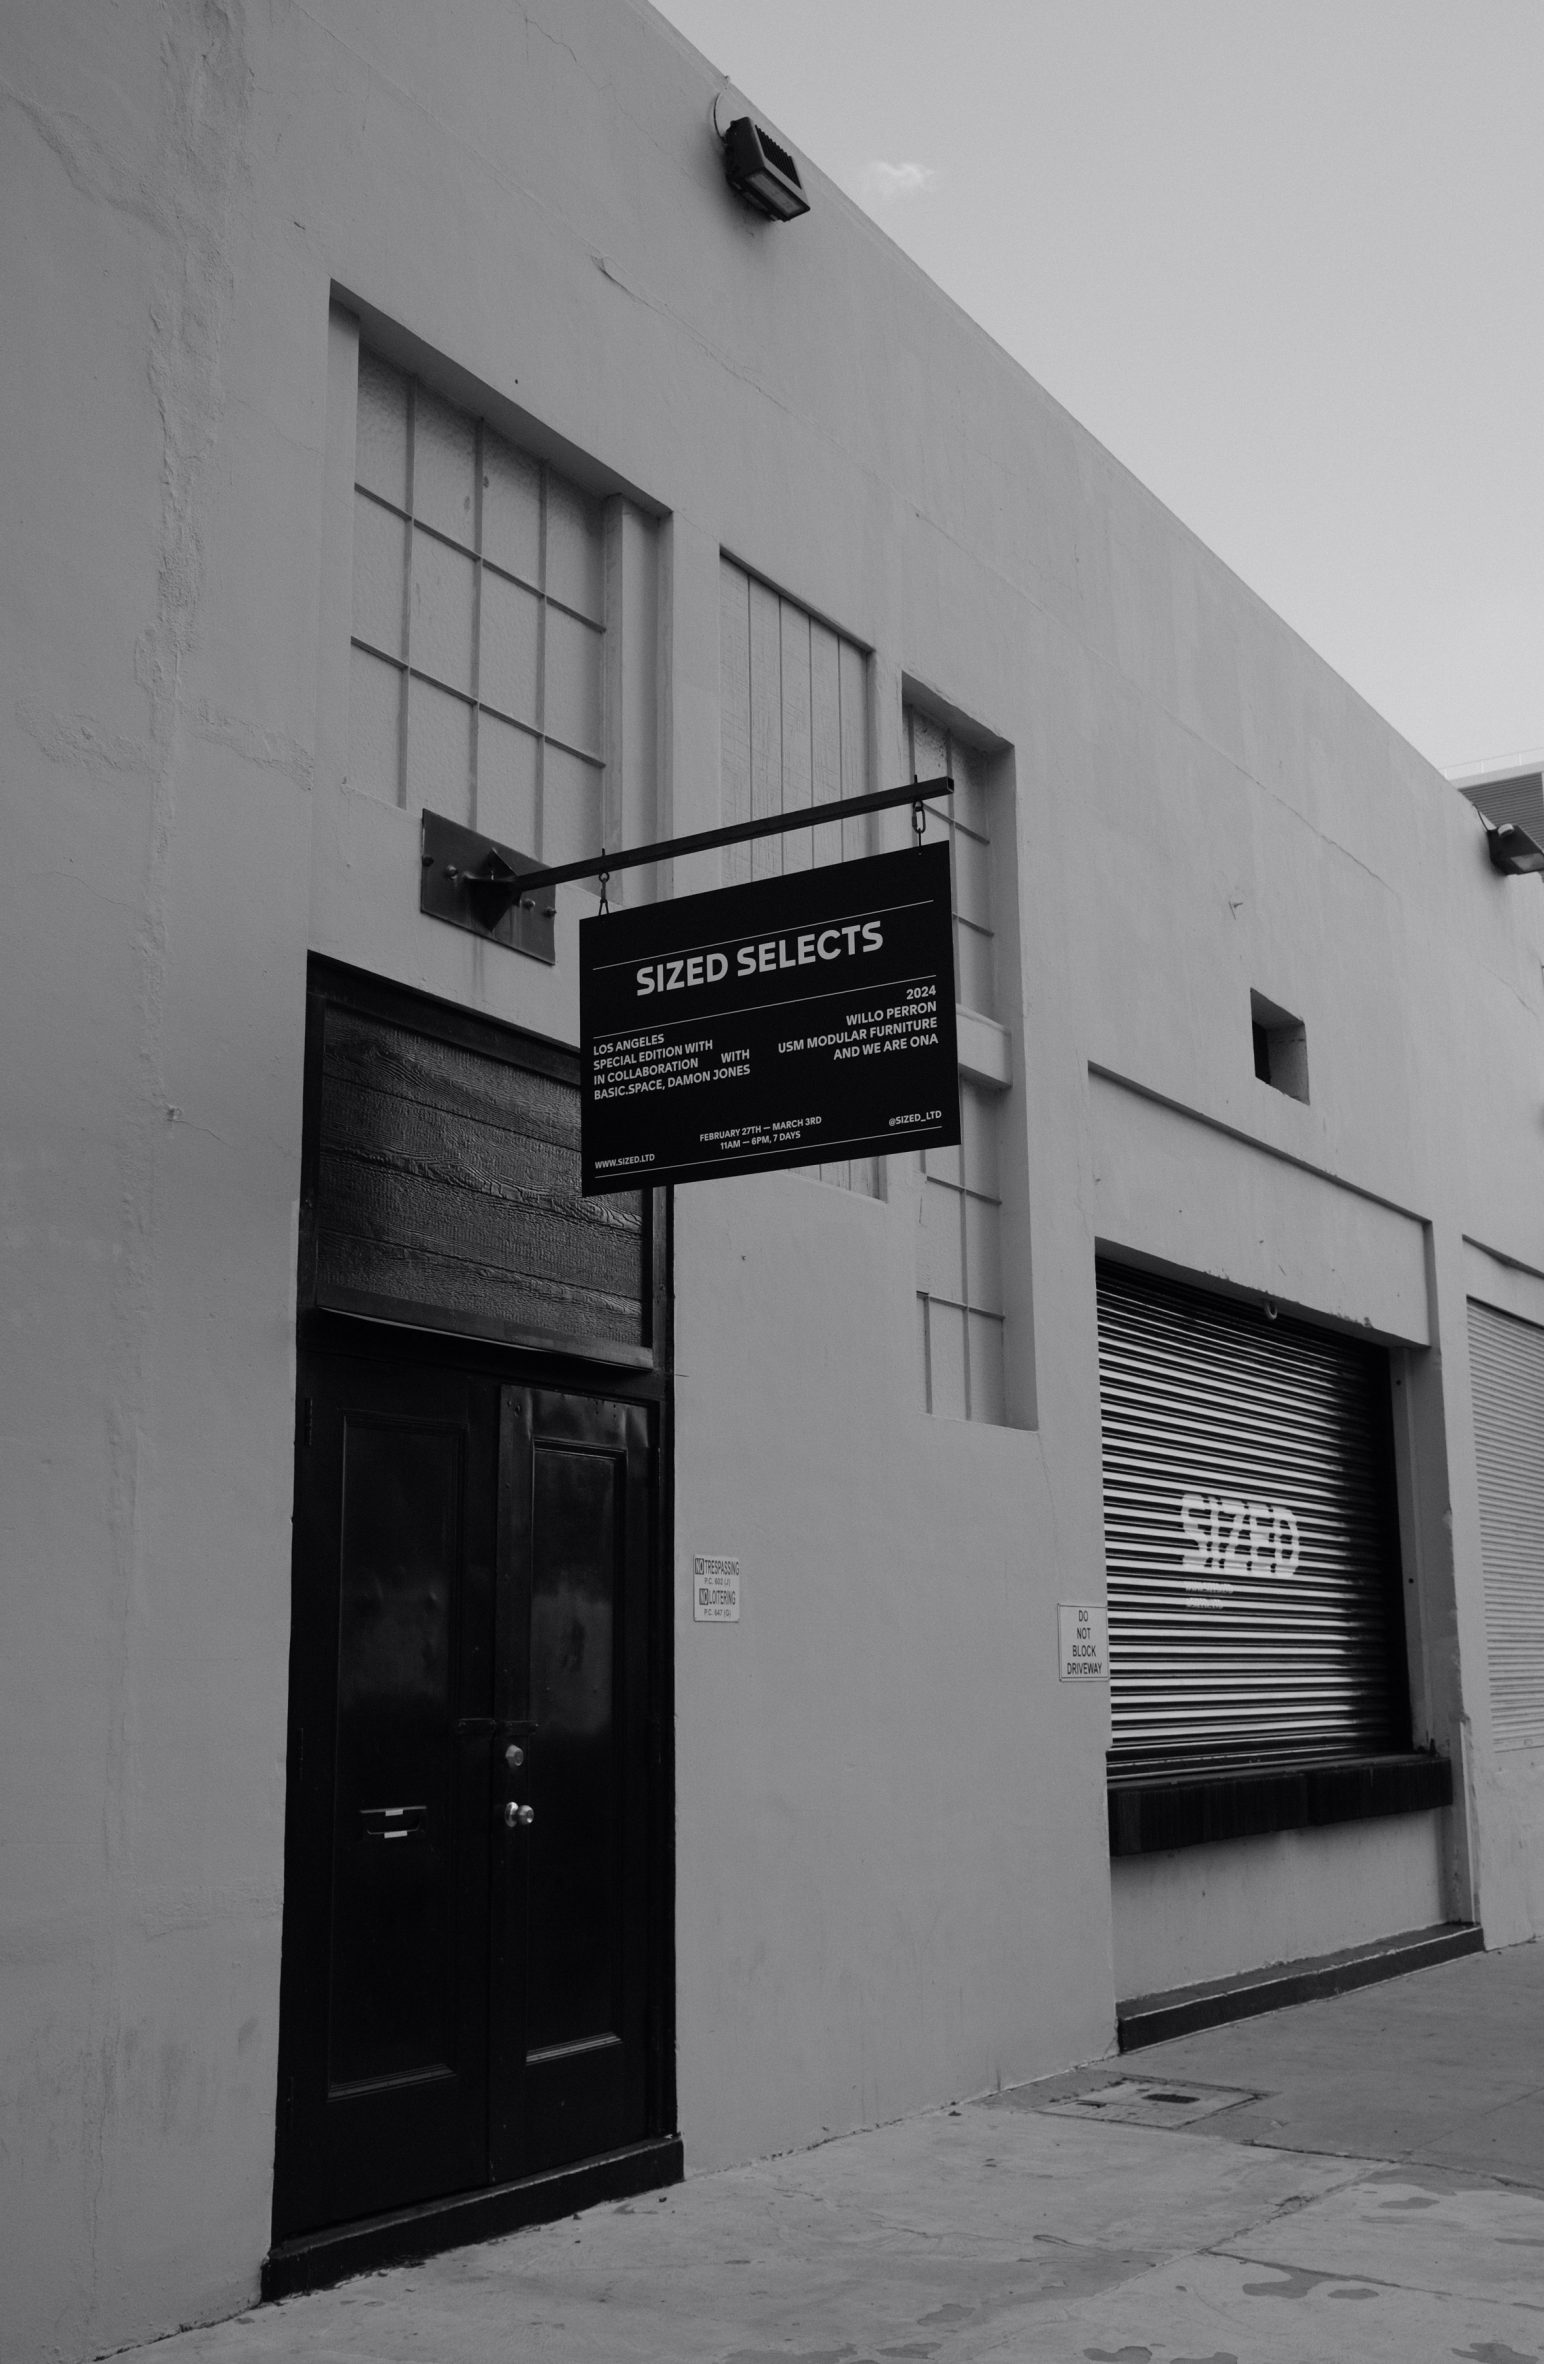 Sized selects sign on the front of white LA storefront